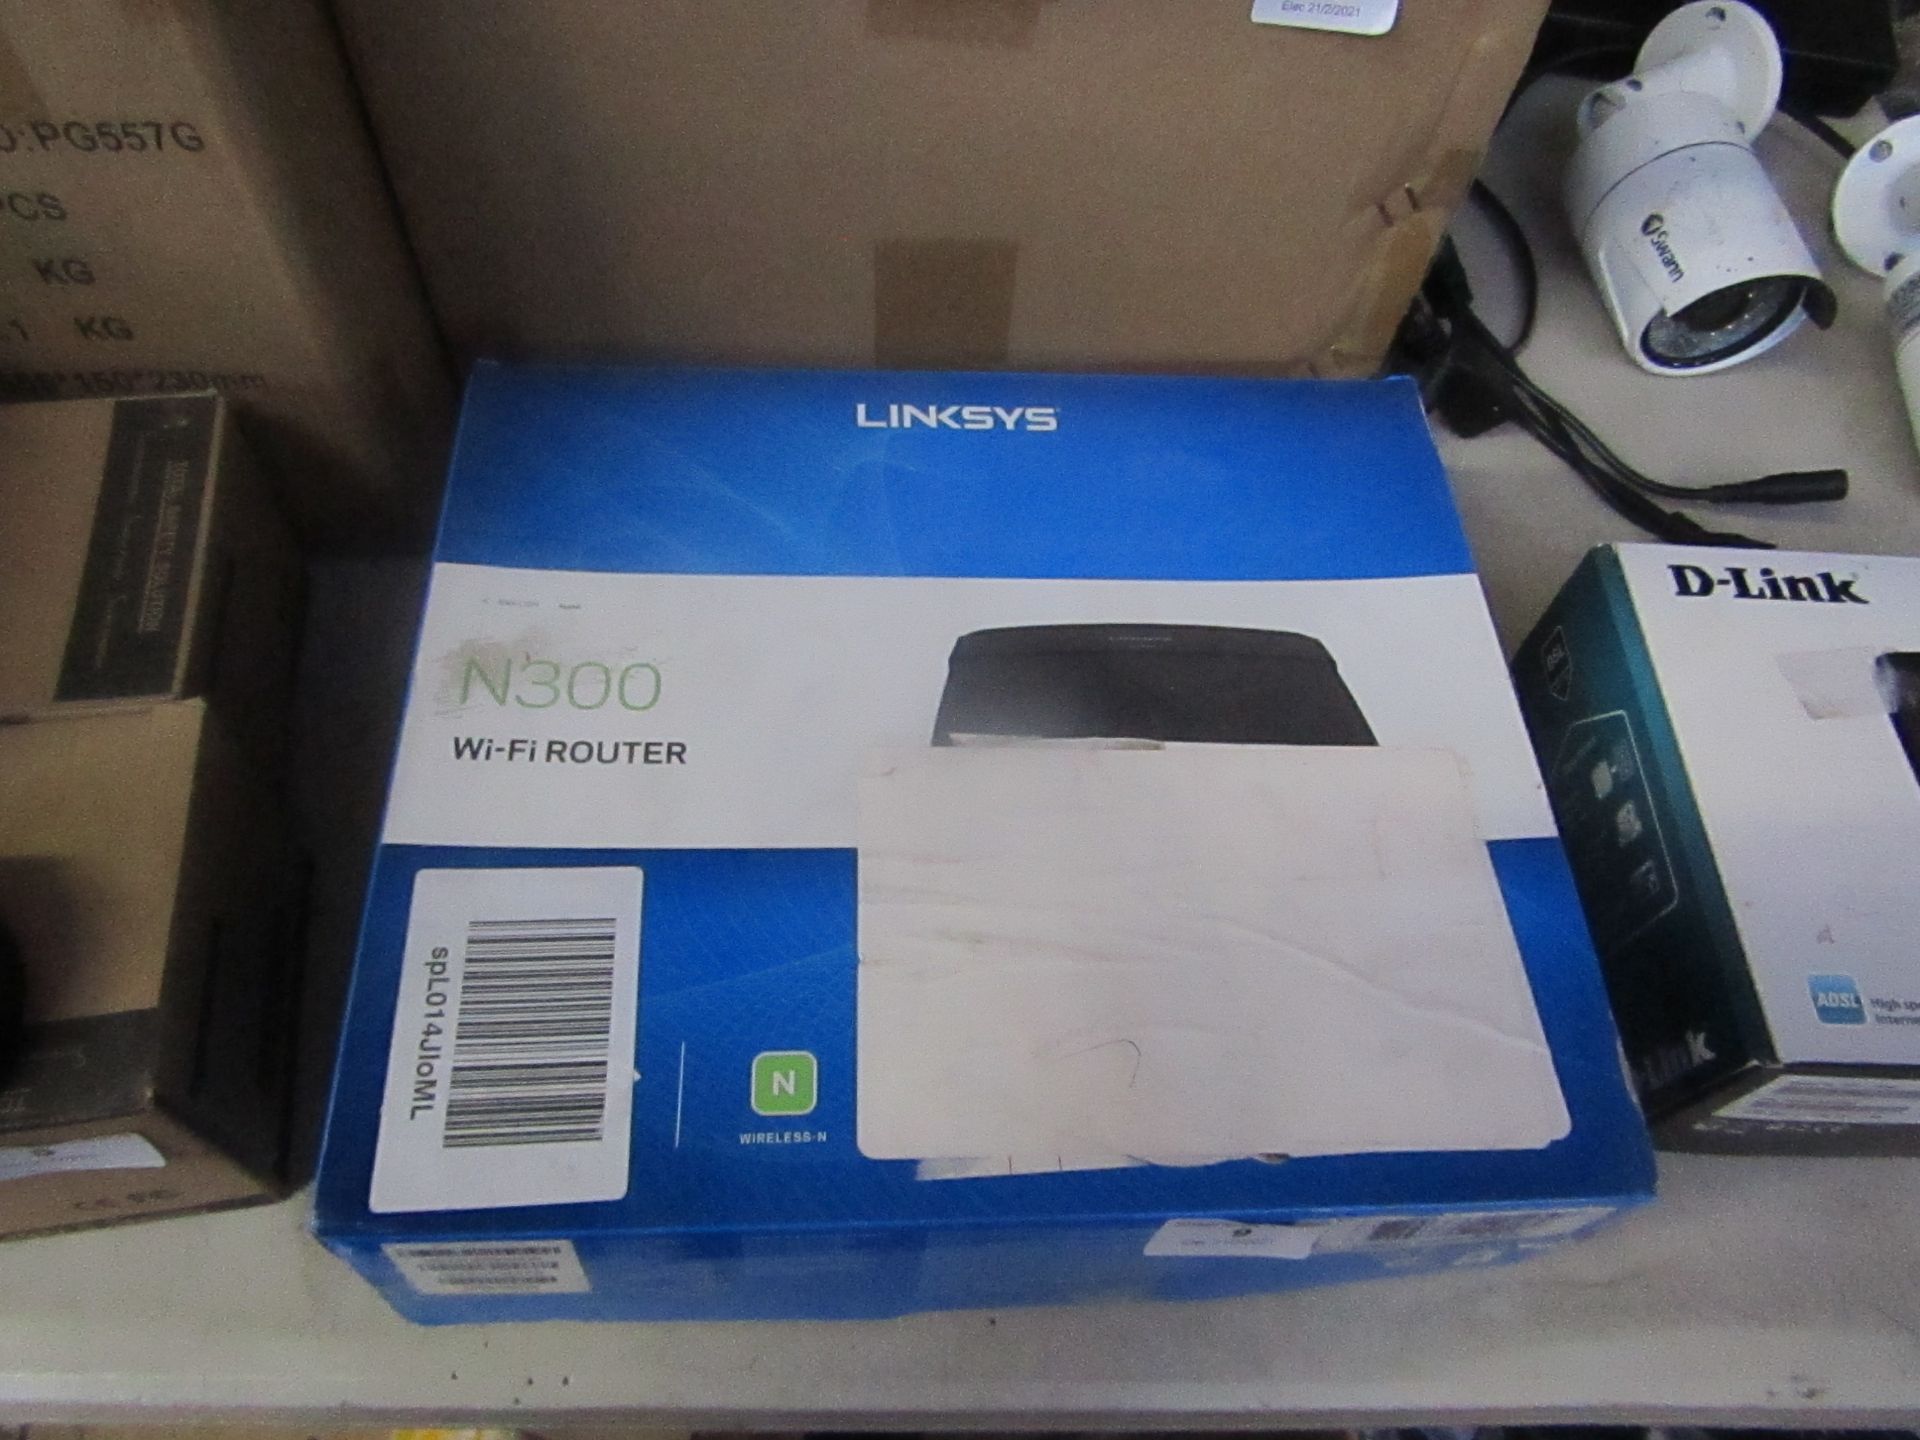 Linksys N300 WI-FI router, Unchecked & Boxed